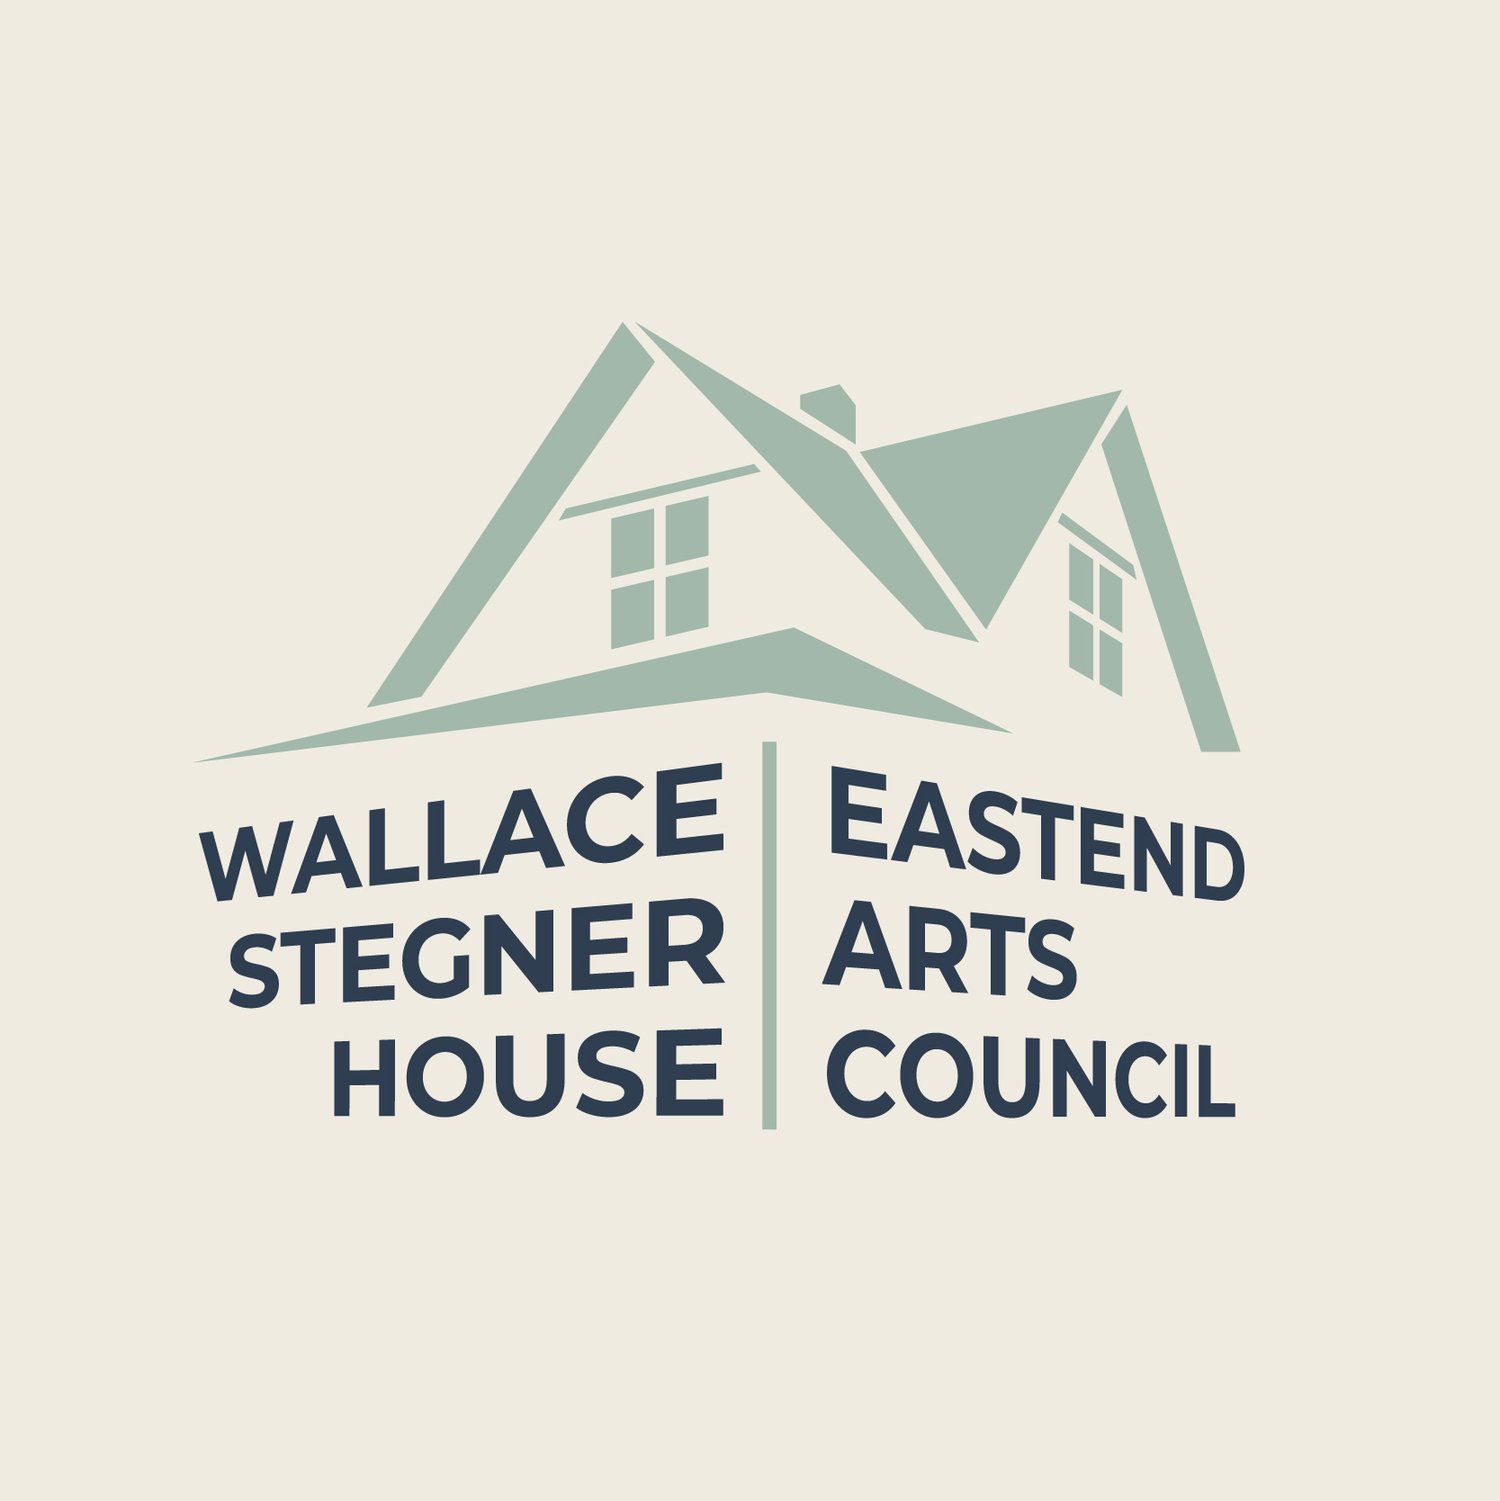 Wallace Stegner House